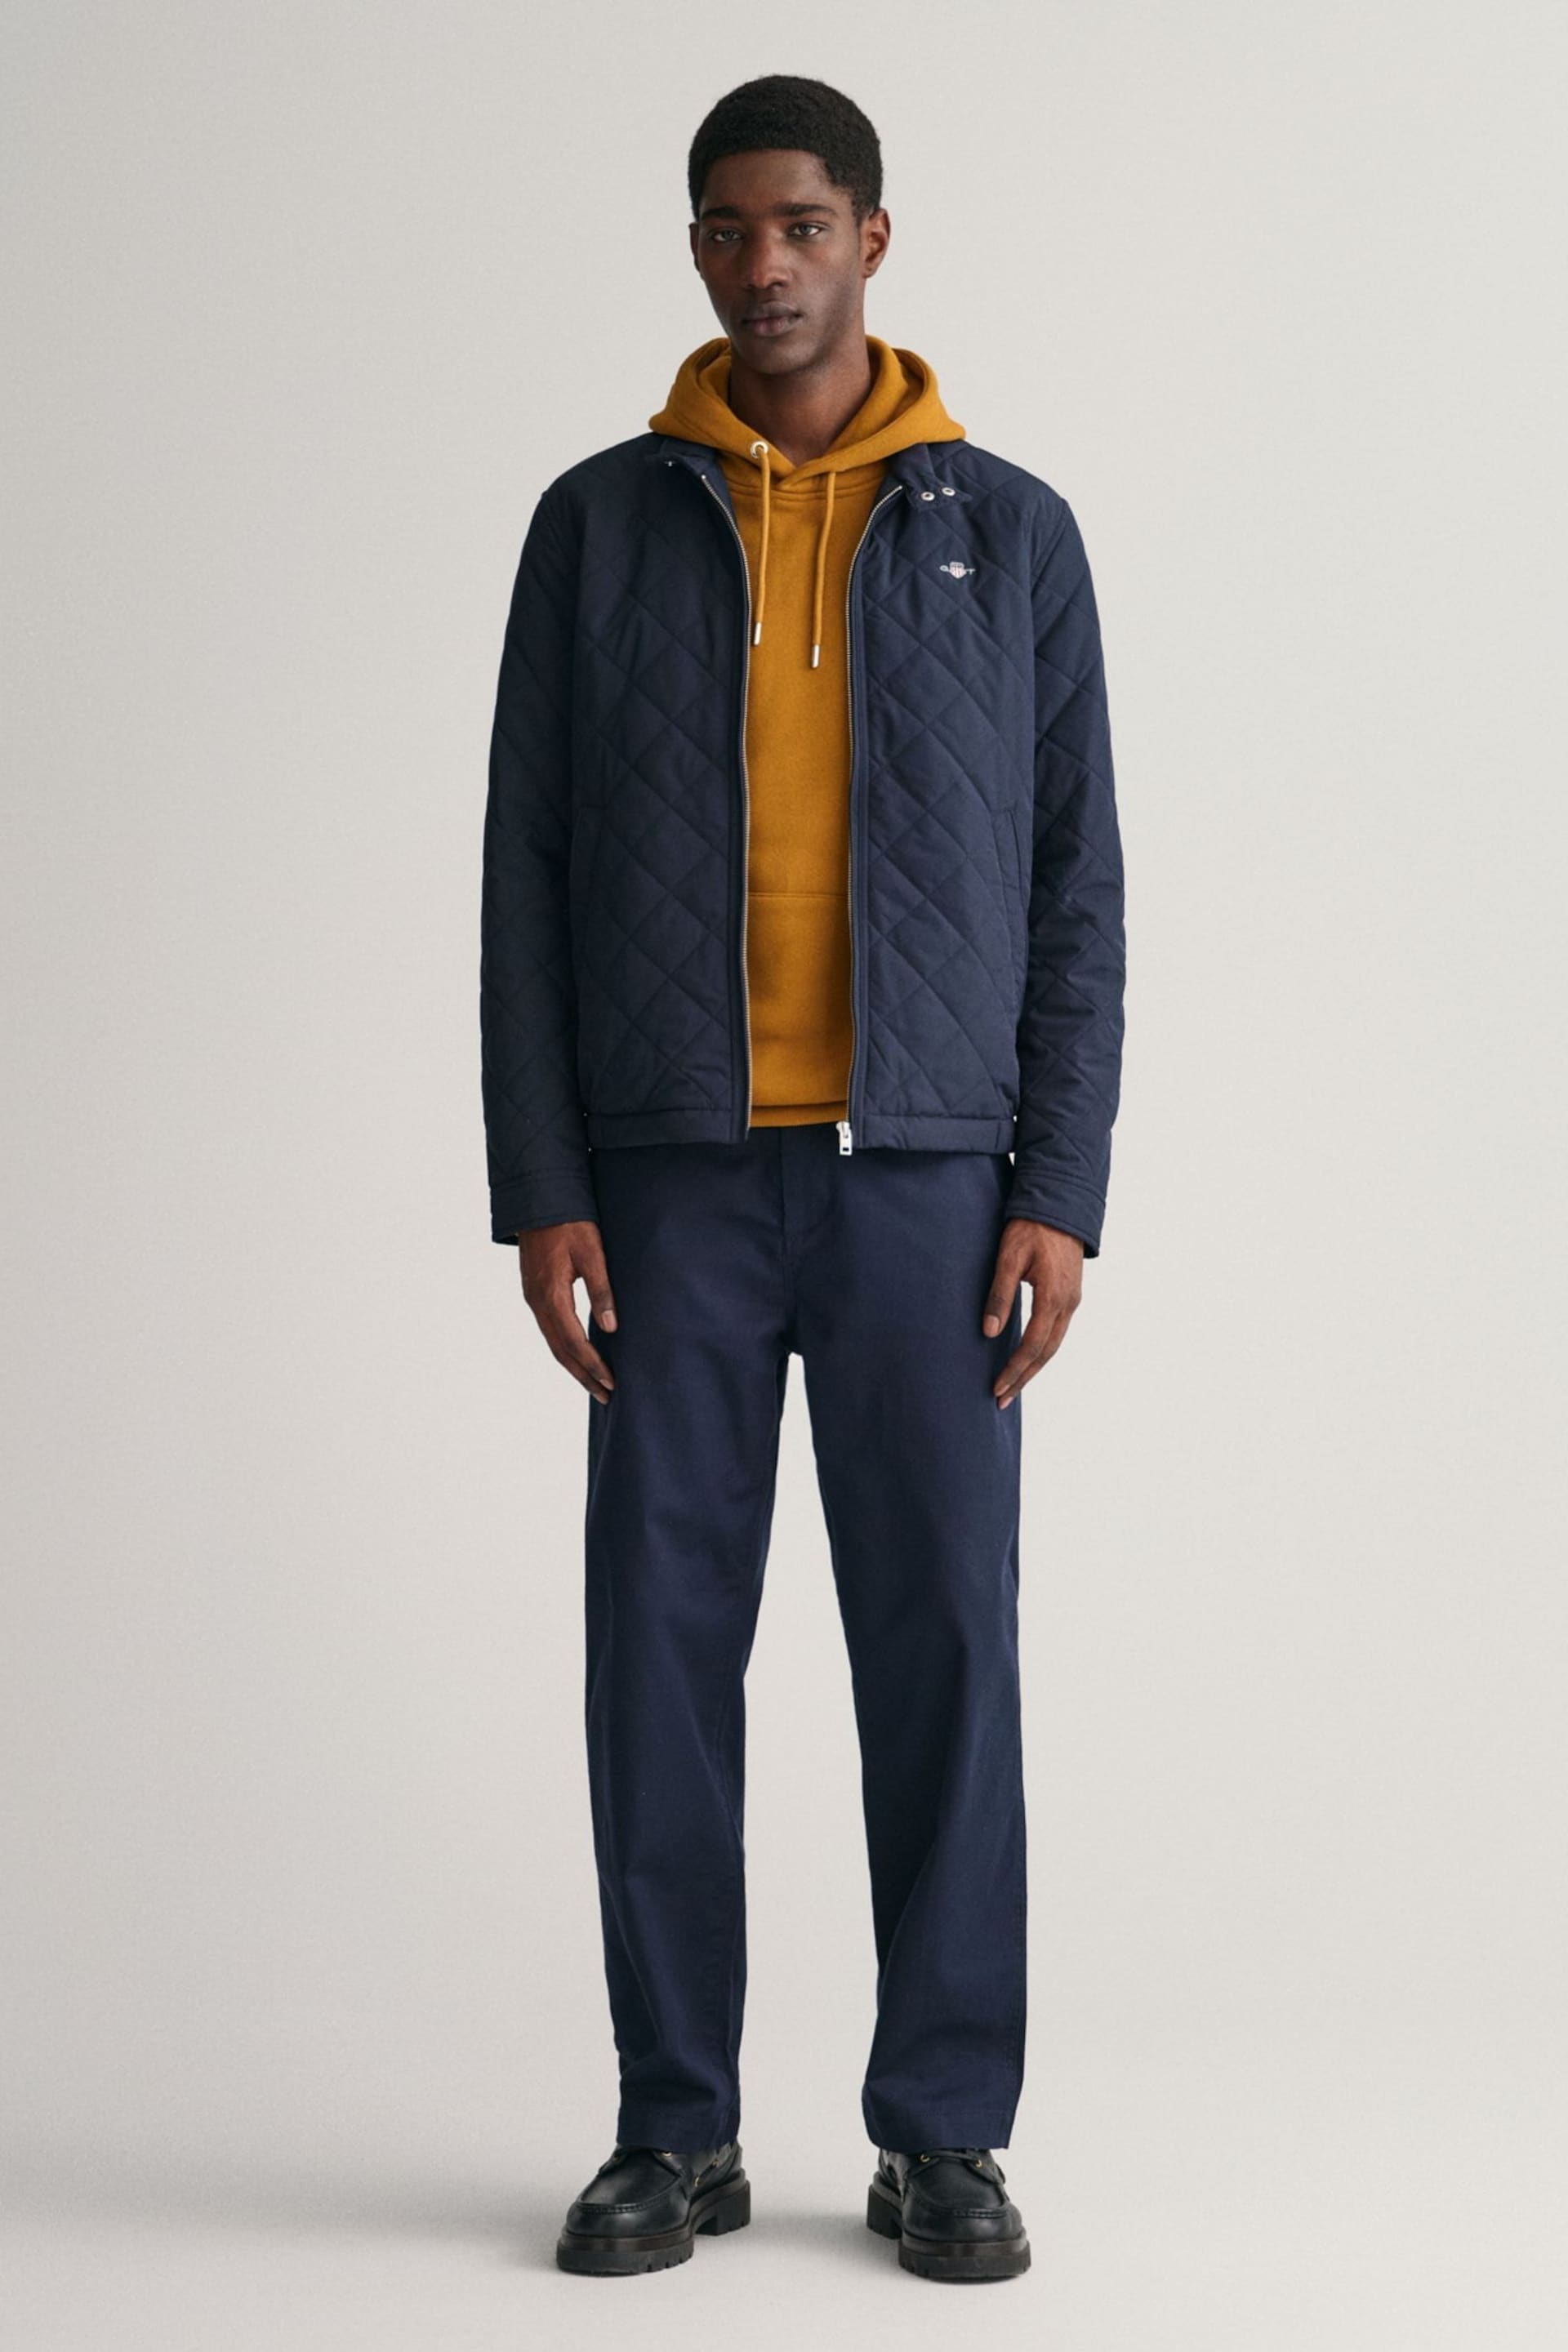 GANT Quilted Windcheater Jacket - Image 3 of 7